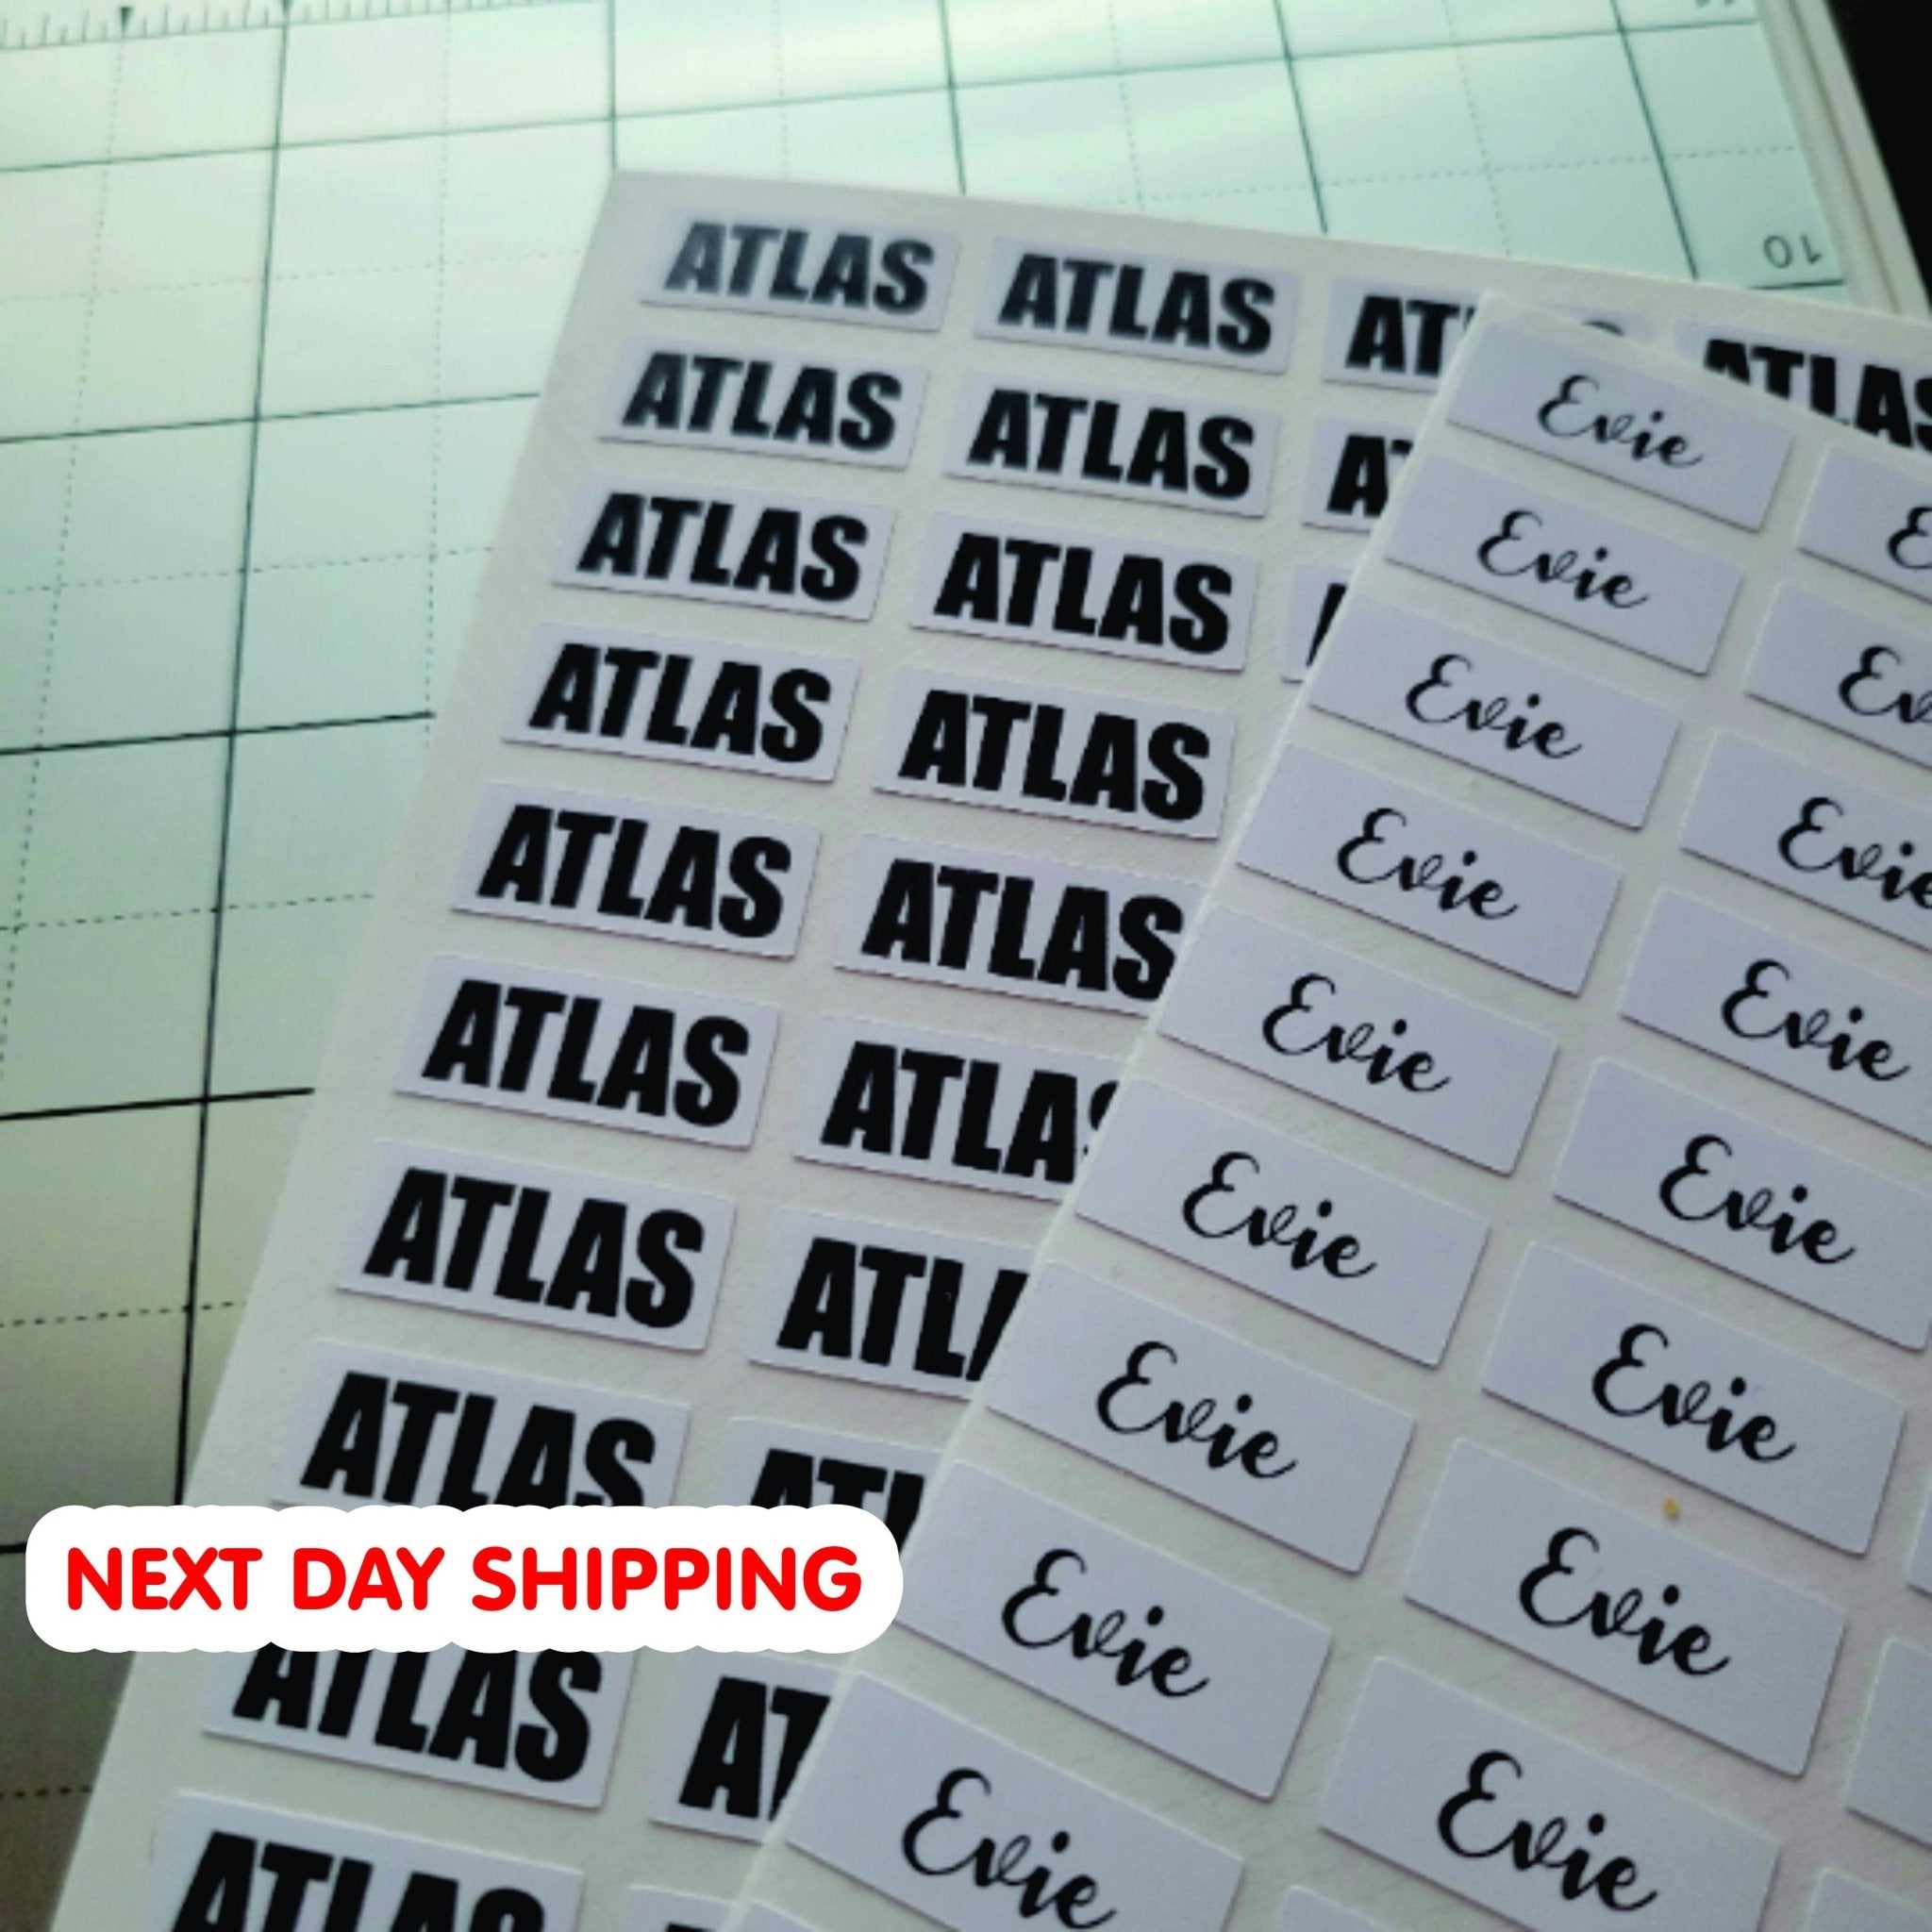 Daycare Labels Waterproof - Dishwasher Safe Name Stickers School